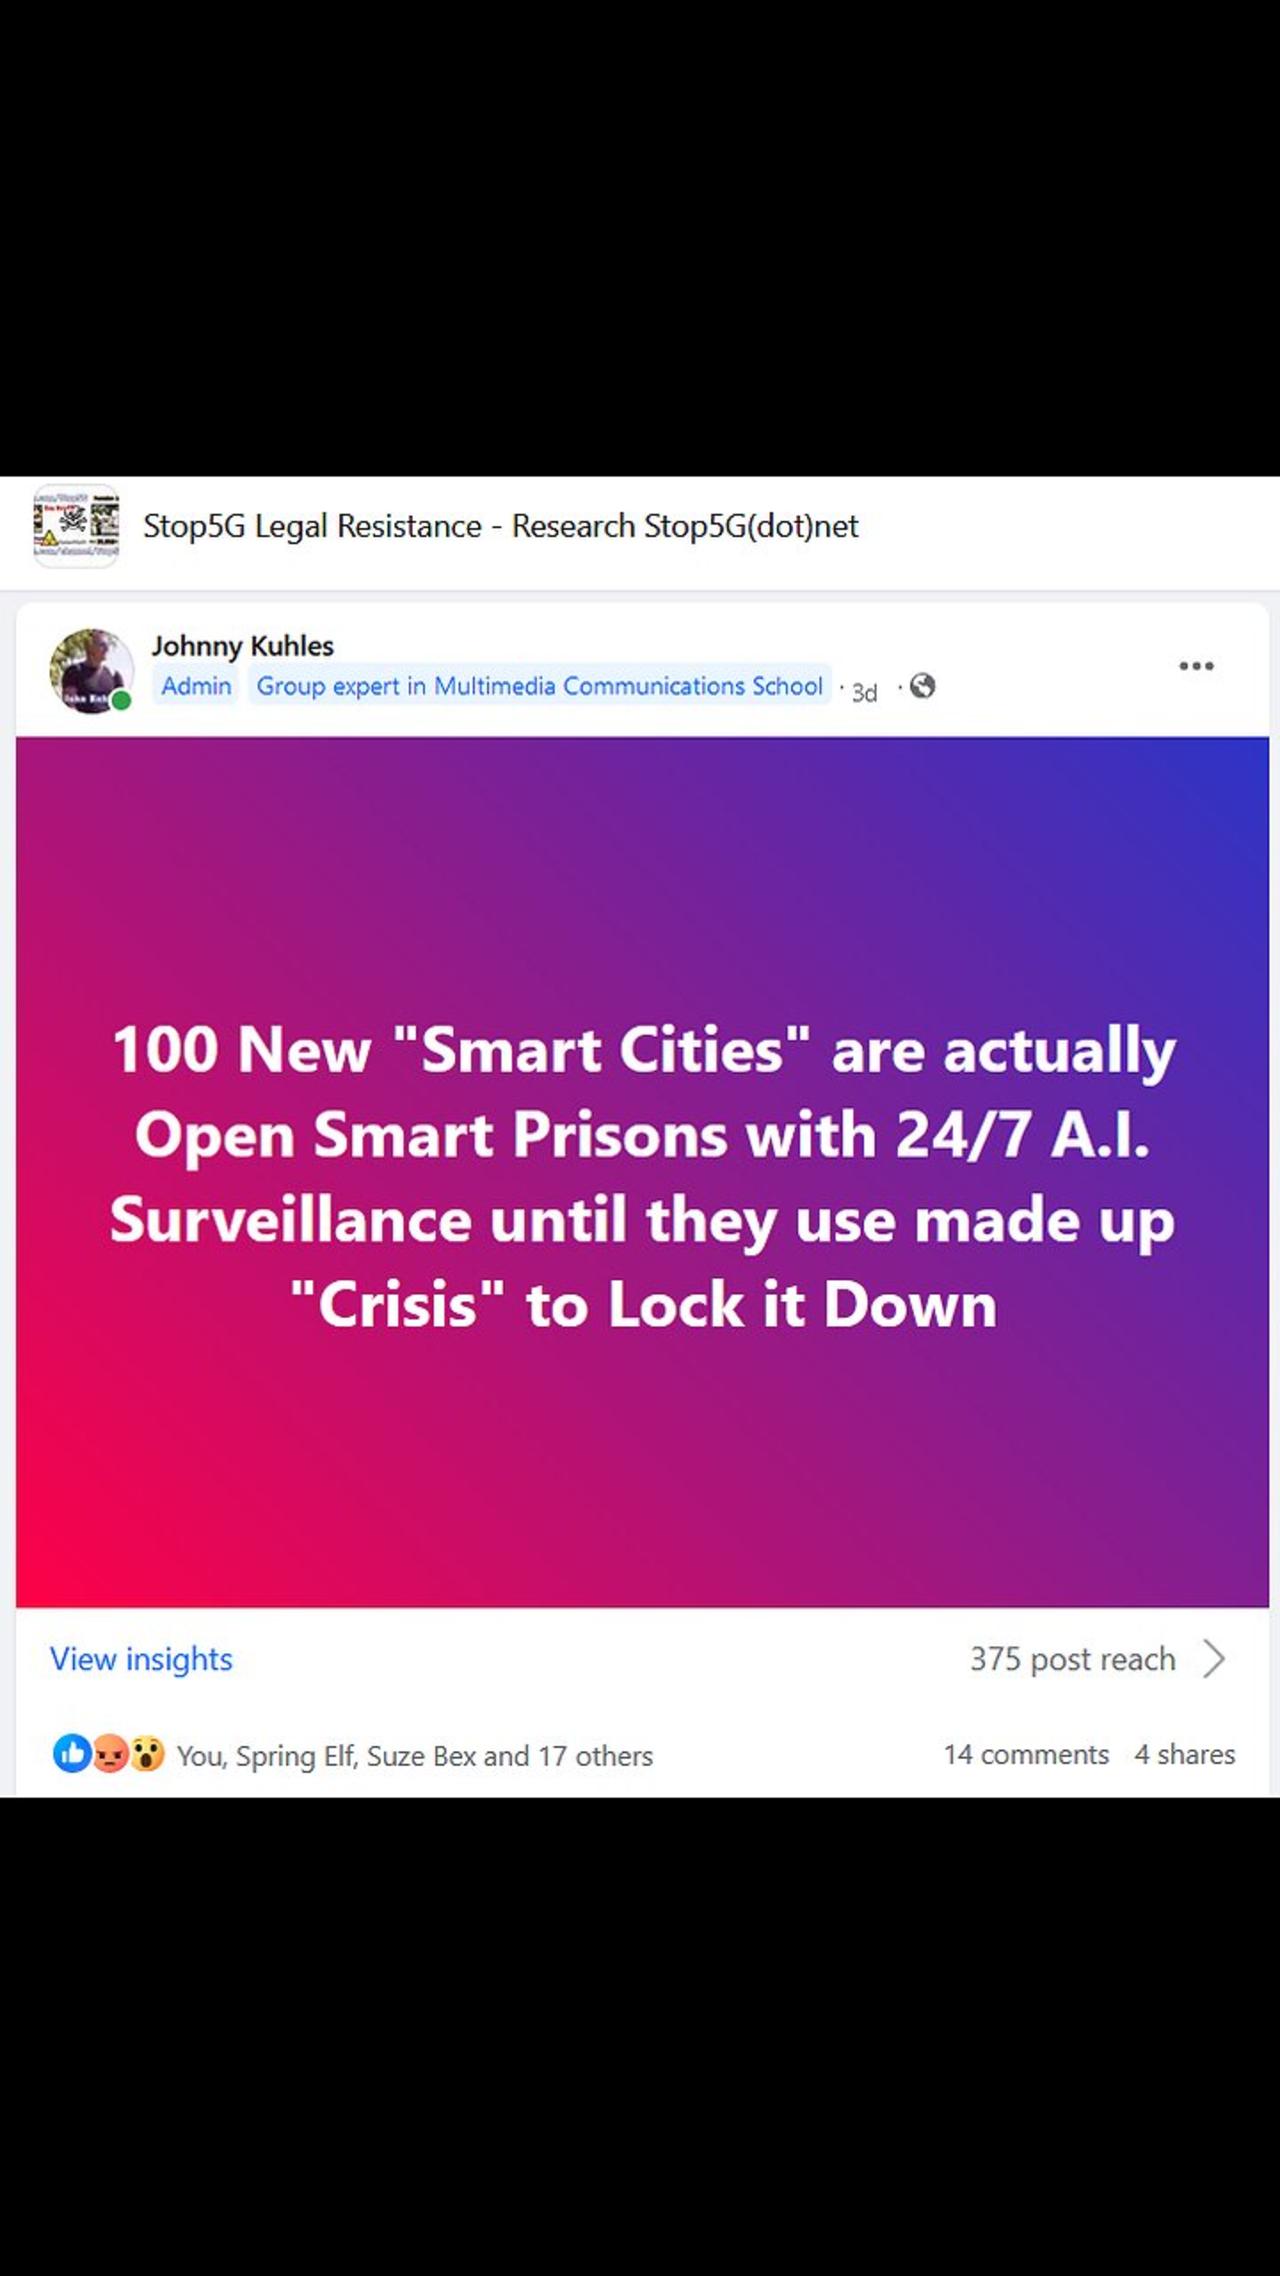 Smart Cities are Smart Prisons